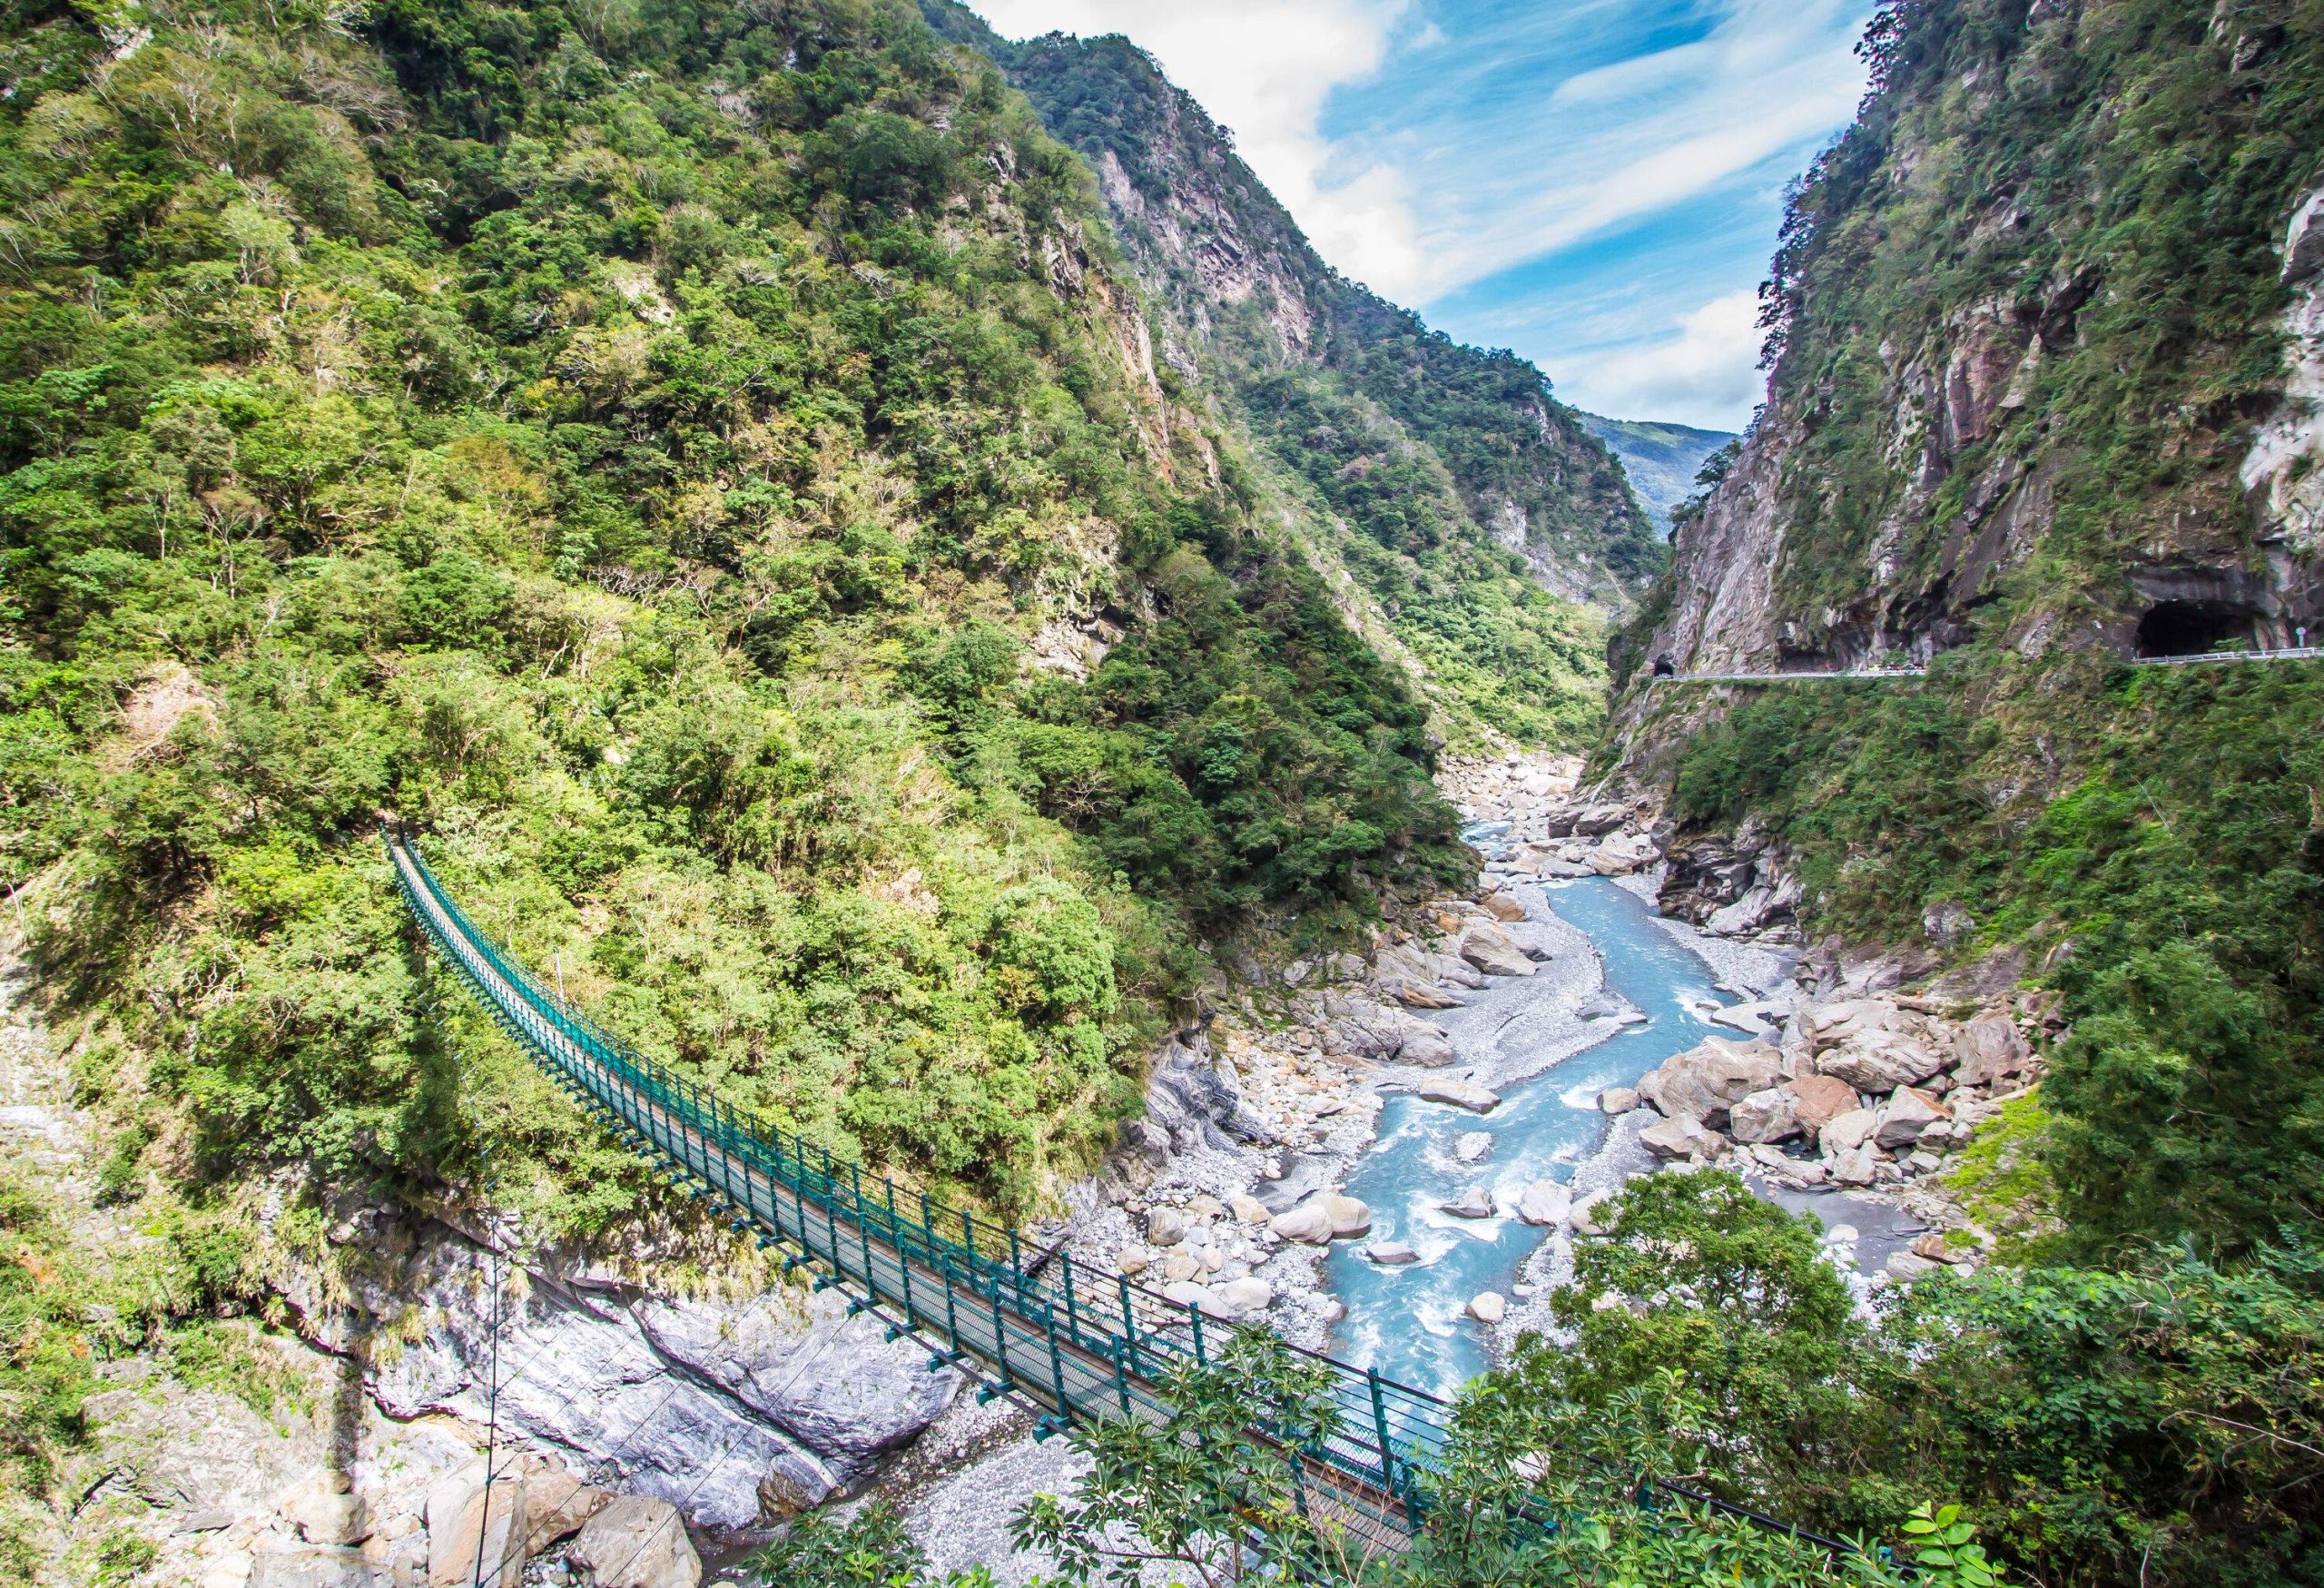 A river gushes between the deep gorges, spanned by a narrow green footbridge.